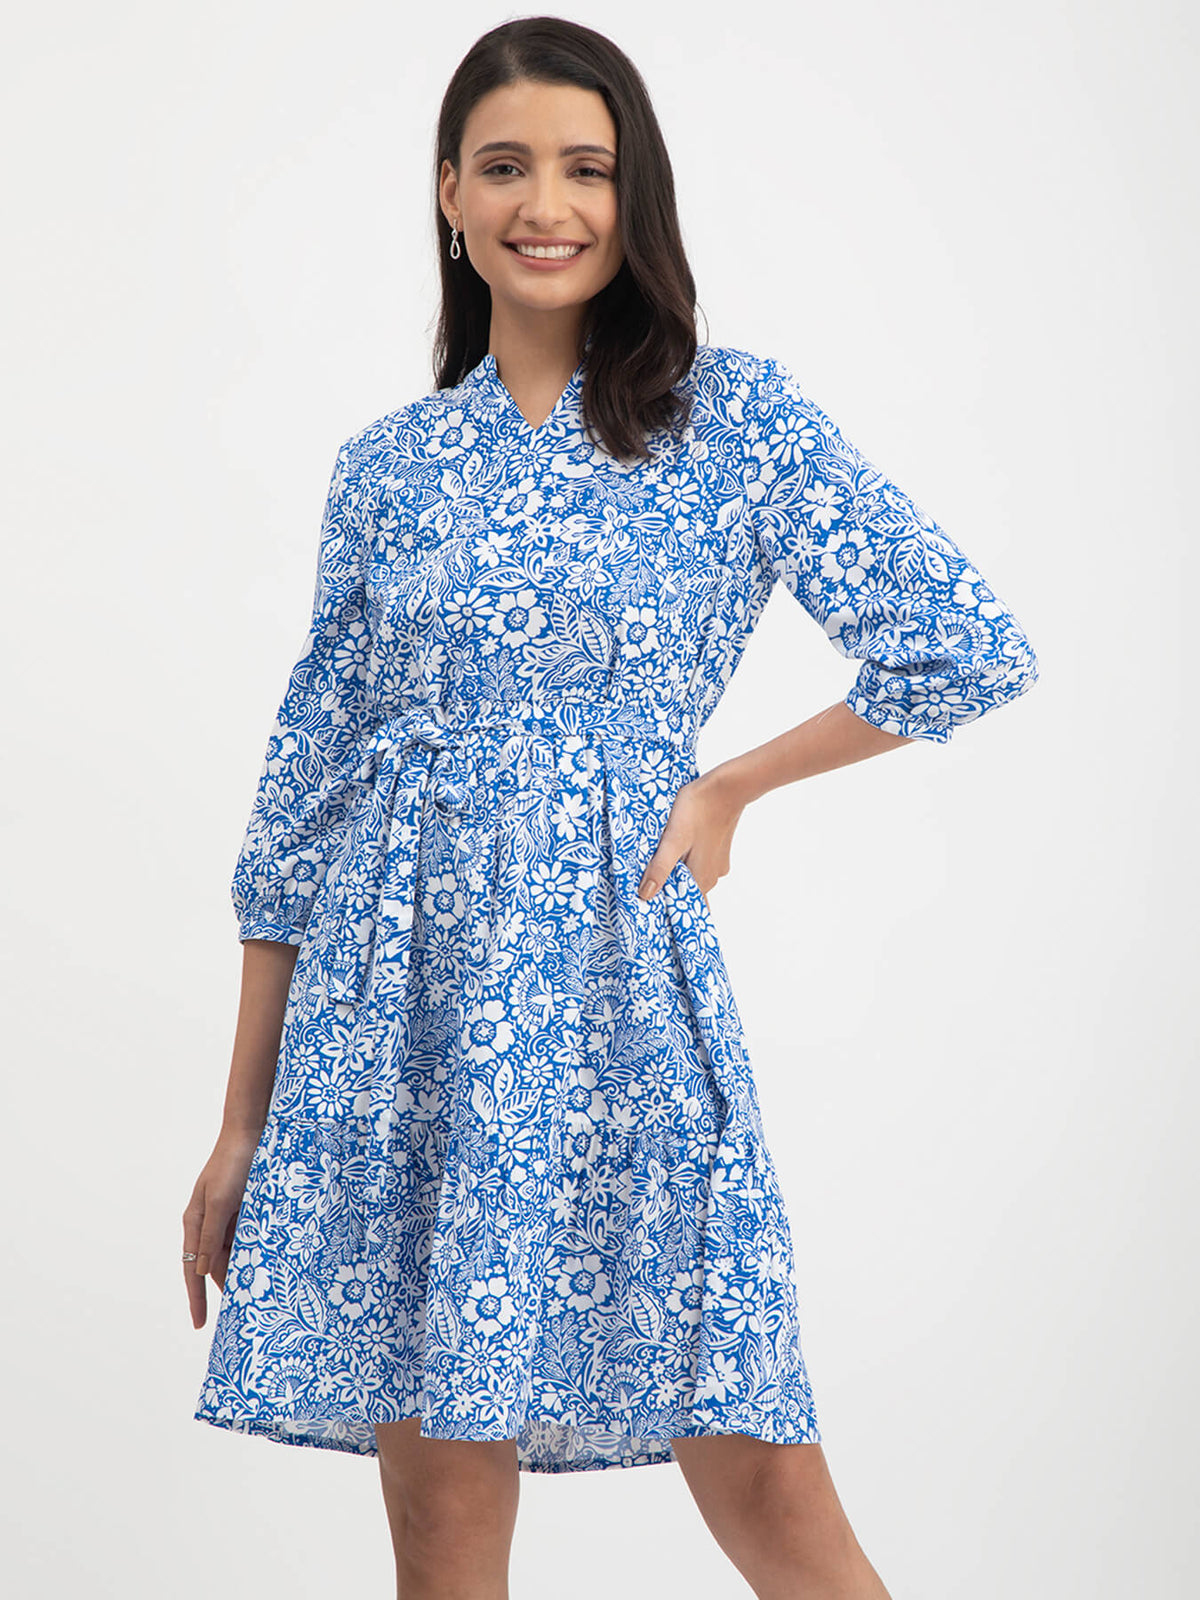 Floral Print Tier Dress - Blue And White